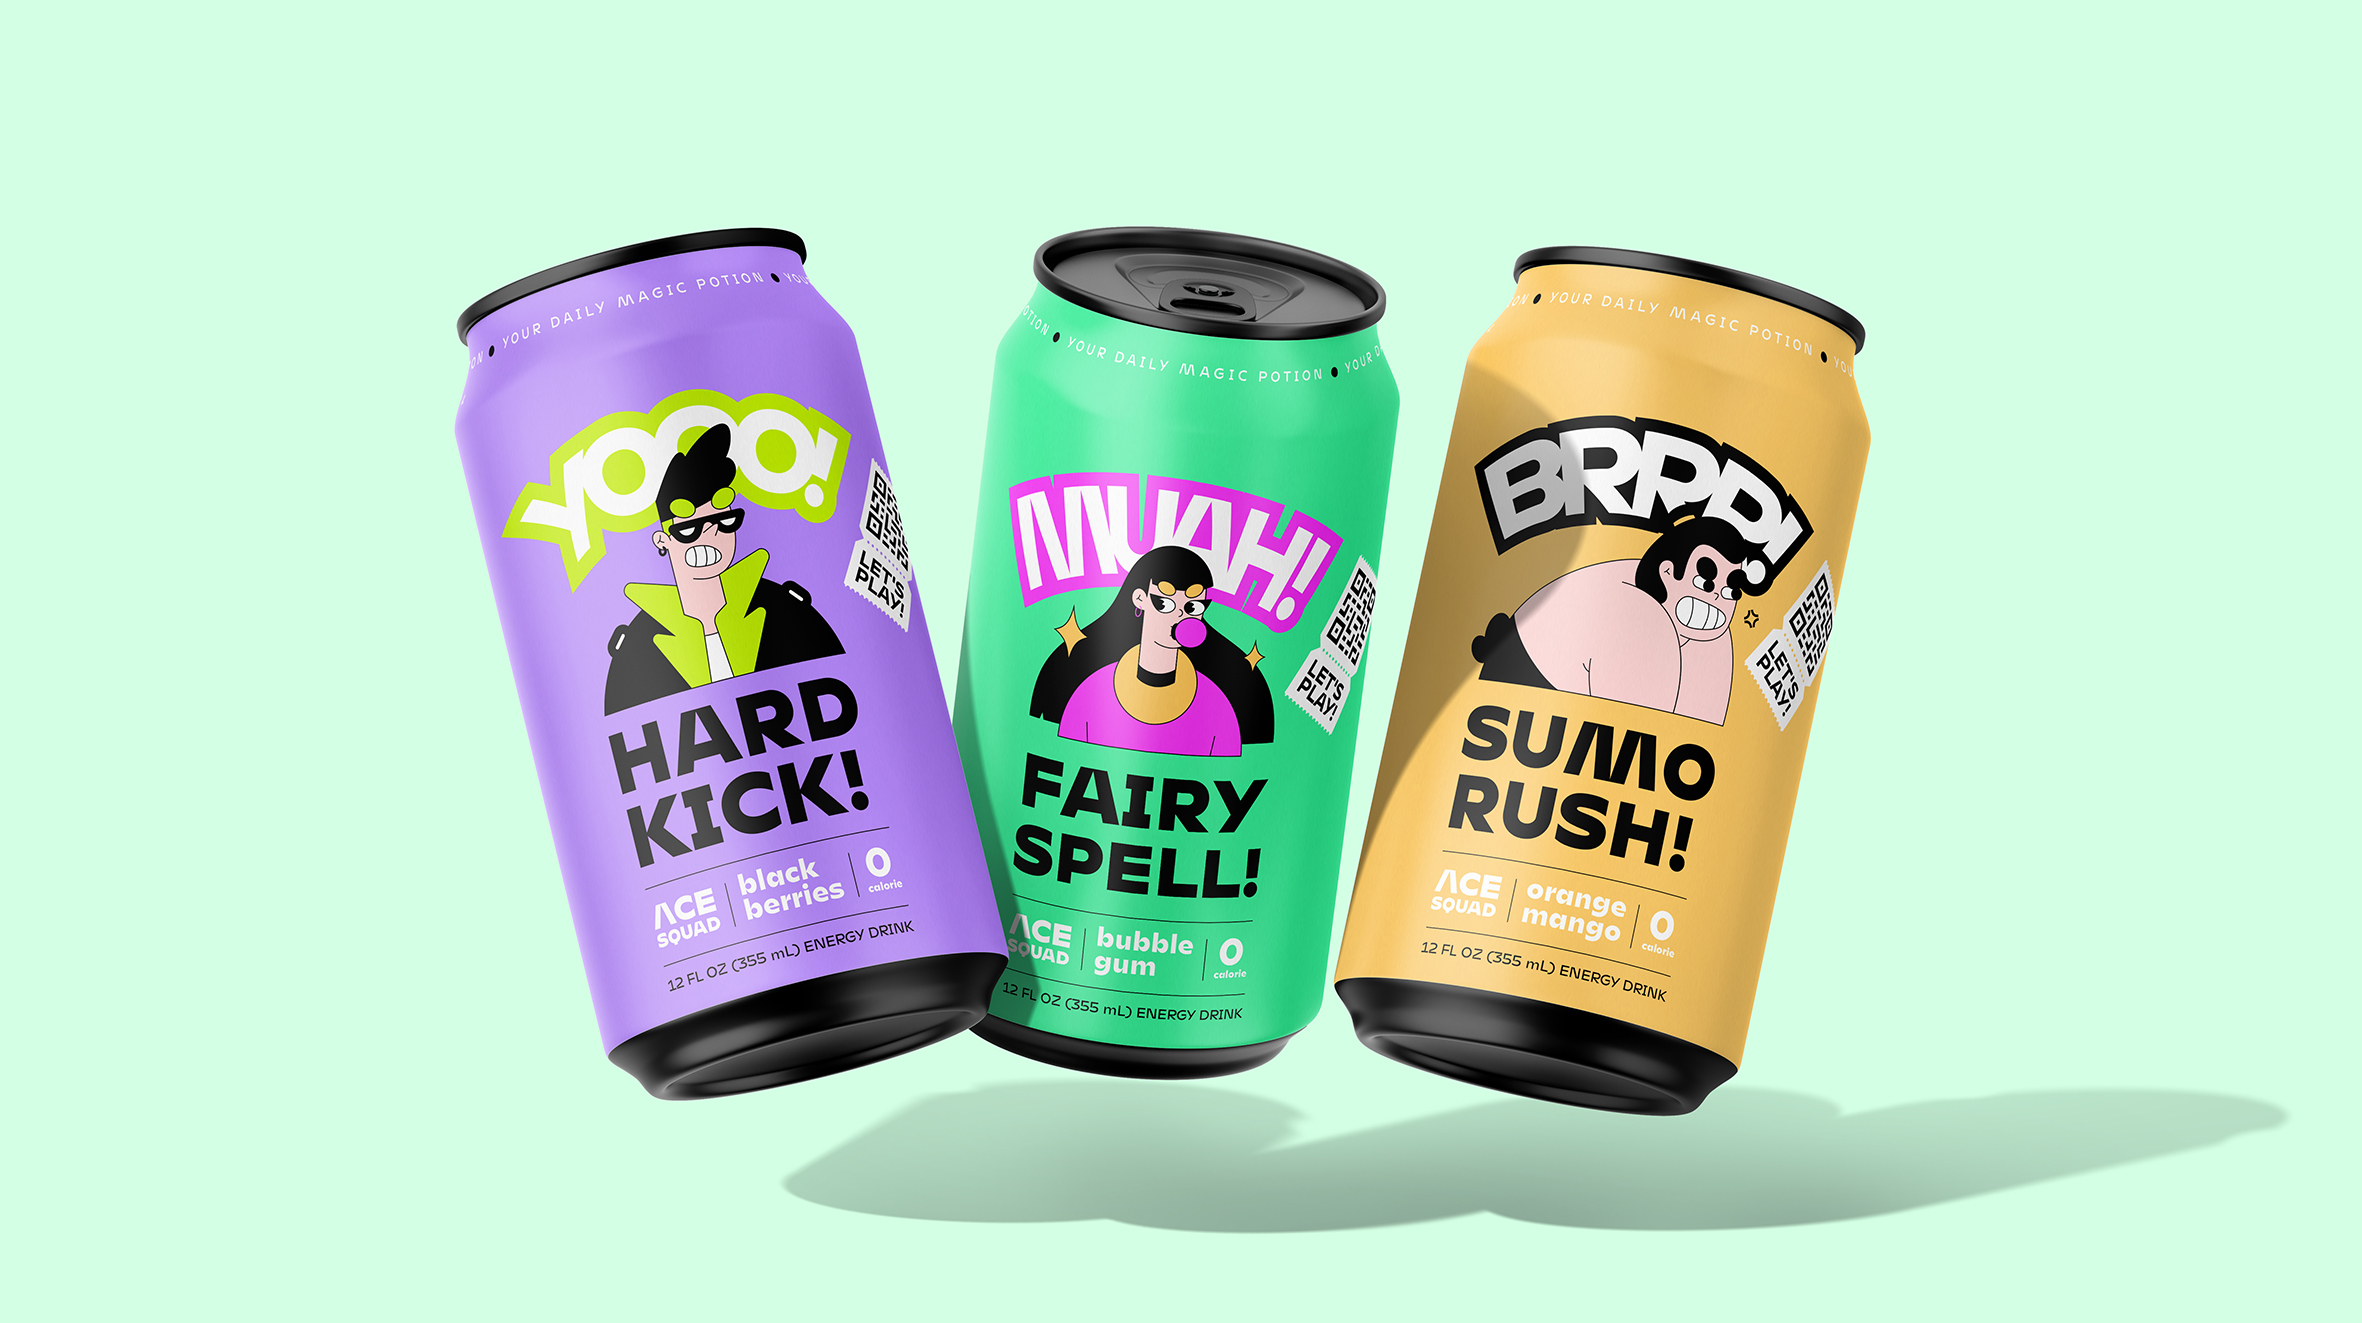 Ace Squad, Gamified Packaging Design